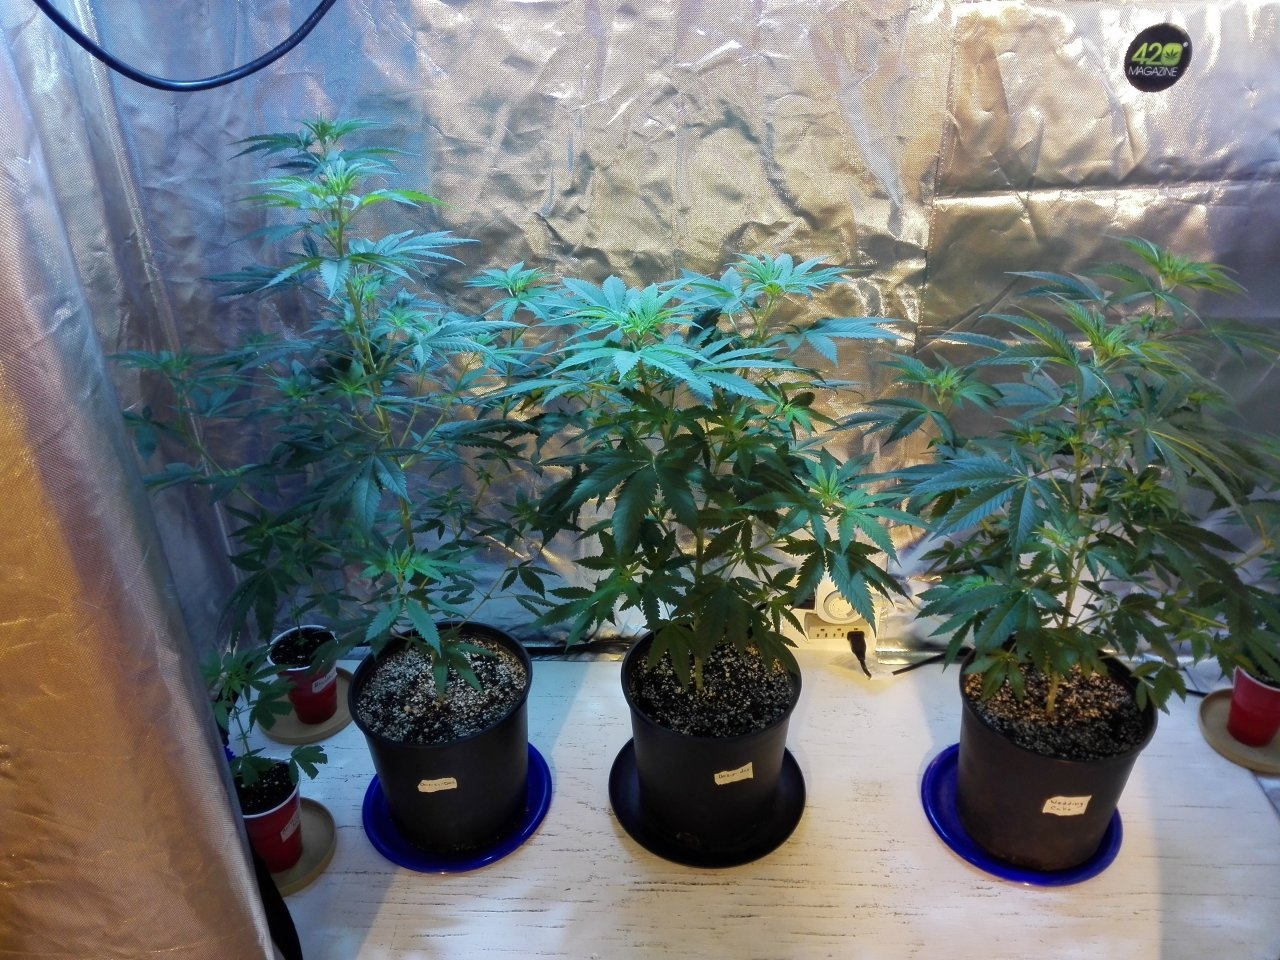 2 Dos si dos on the left, and 1 Wedding Cake on the right by Blackskull Seeds